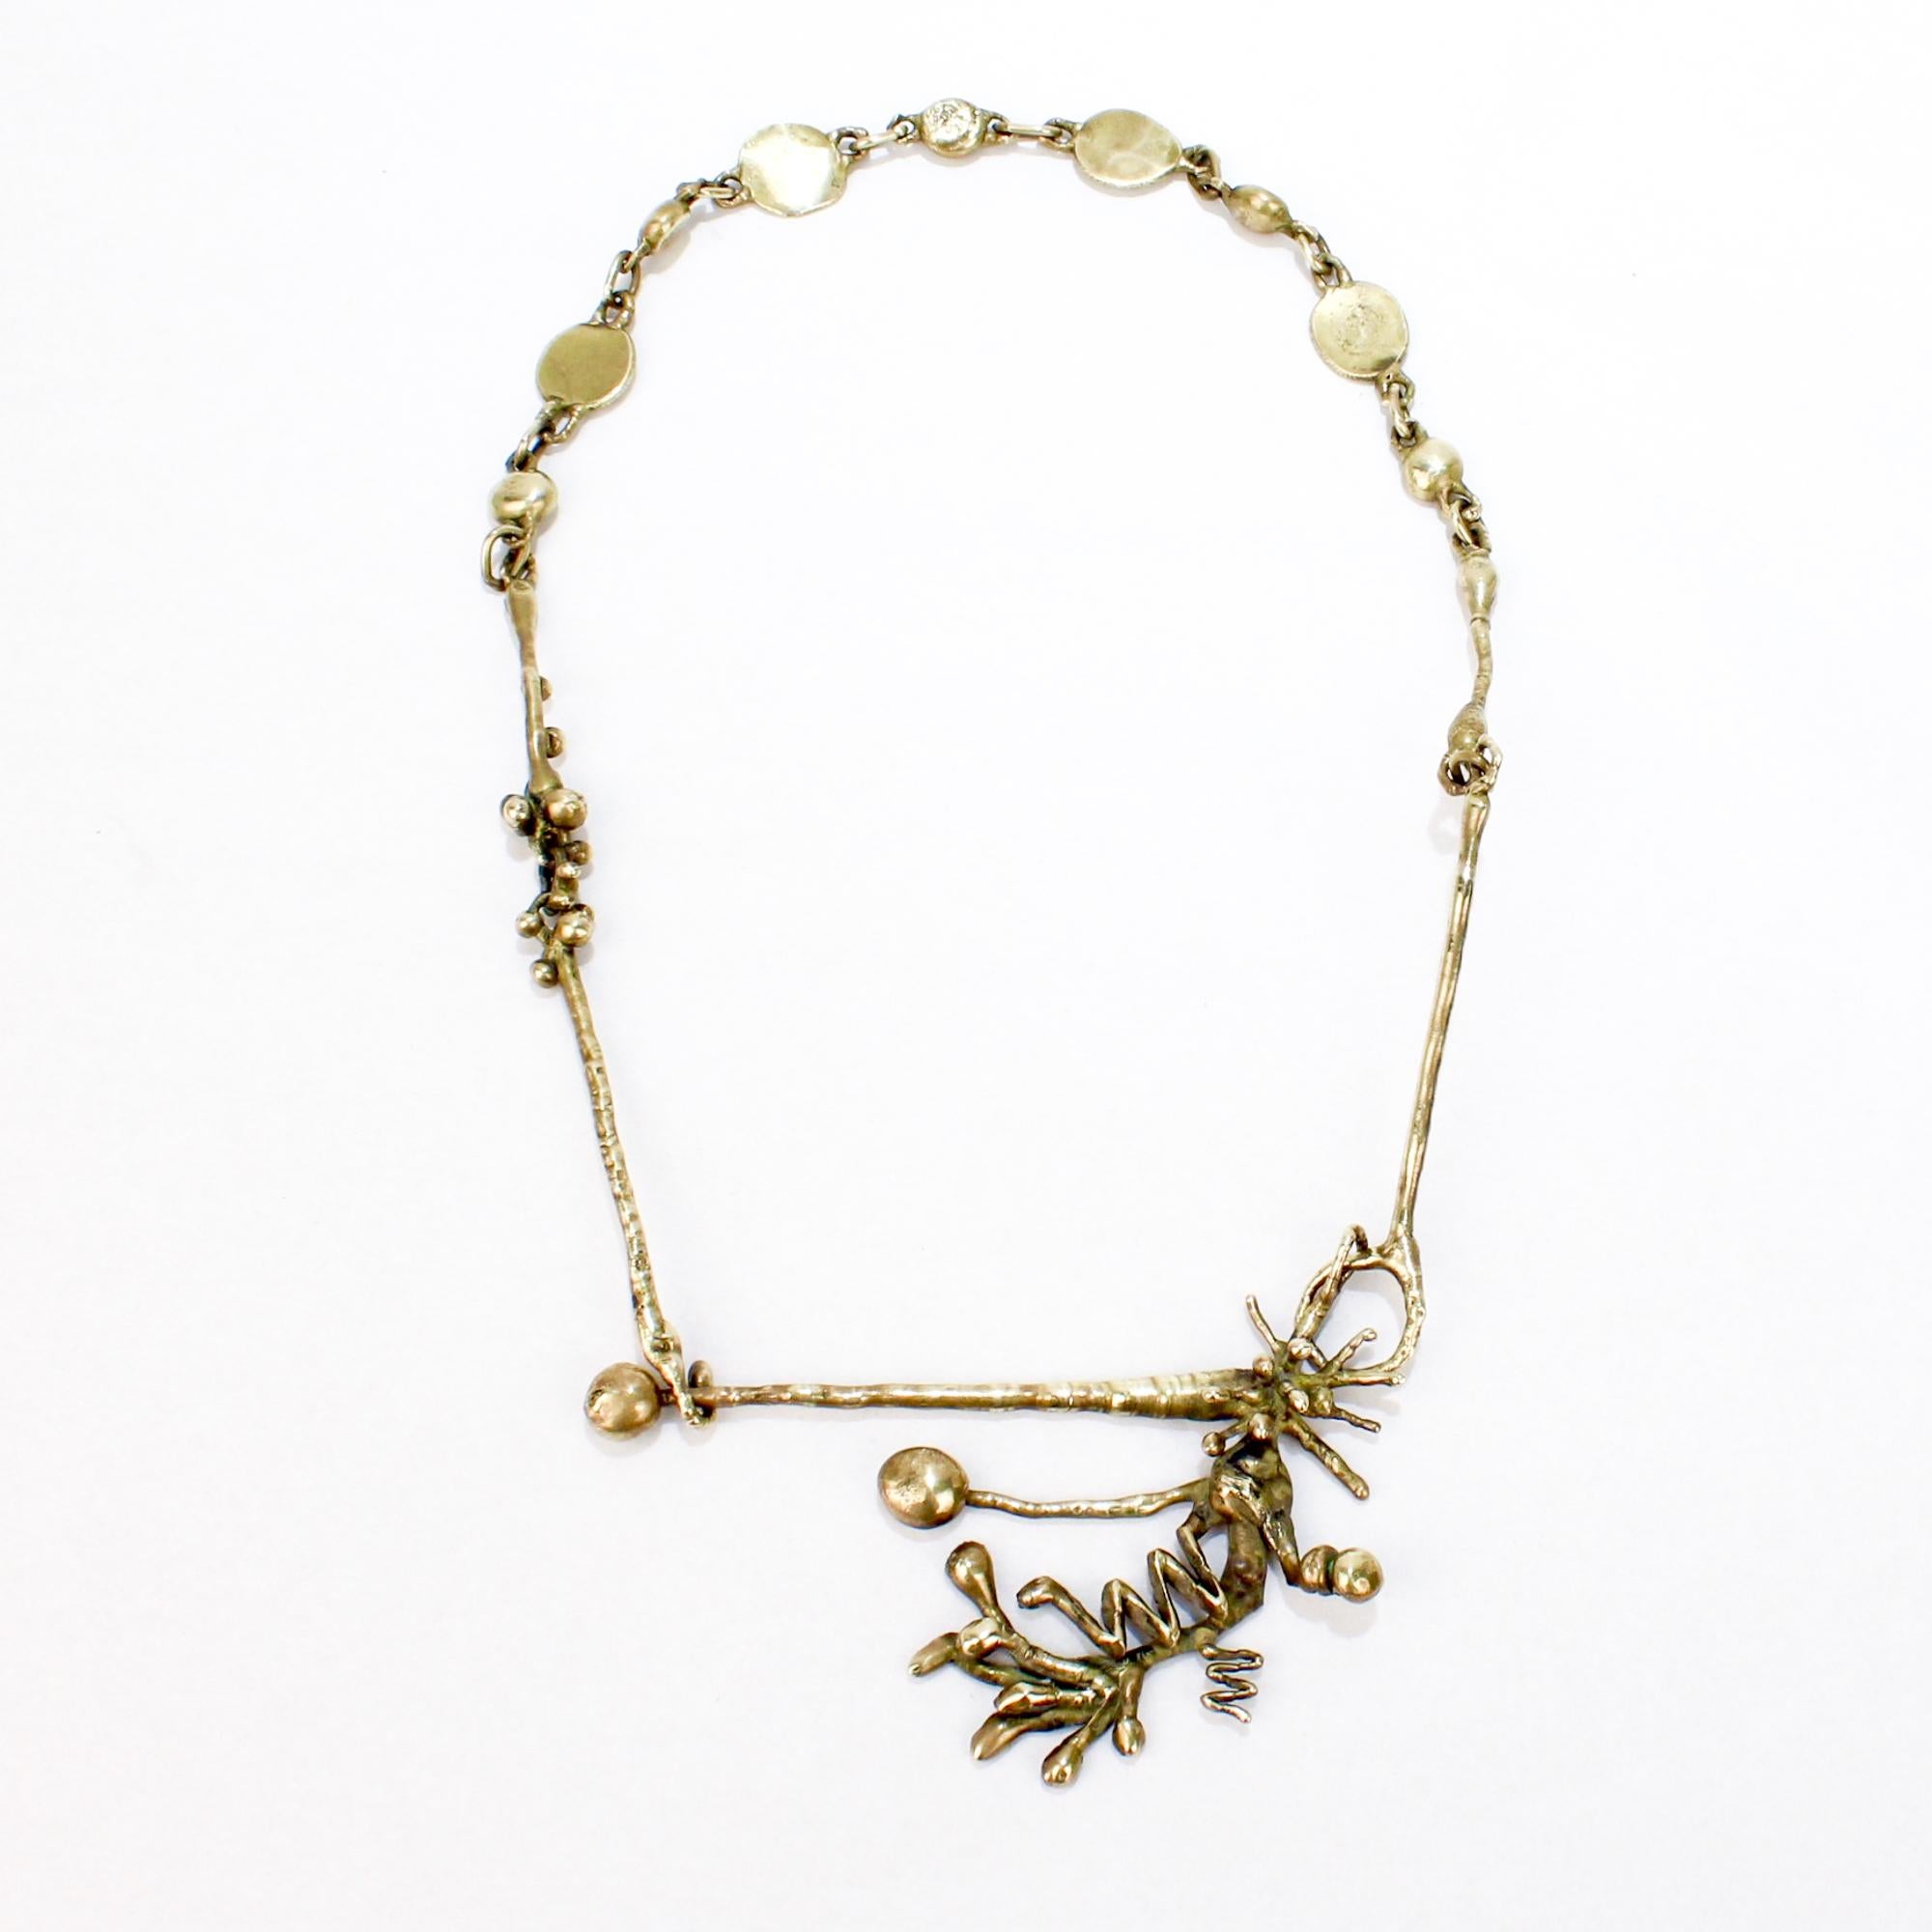 A mid-century modern brass Brutalist necklace.

In the style of Jack Boyd & Pal Kepenyes.

With an abstract organic Brutalist drop resembling a tree branch on a brass chain link necklace.

Simply a wonderful brass Brutalist